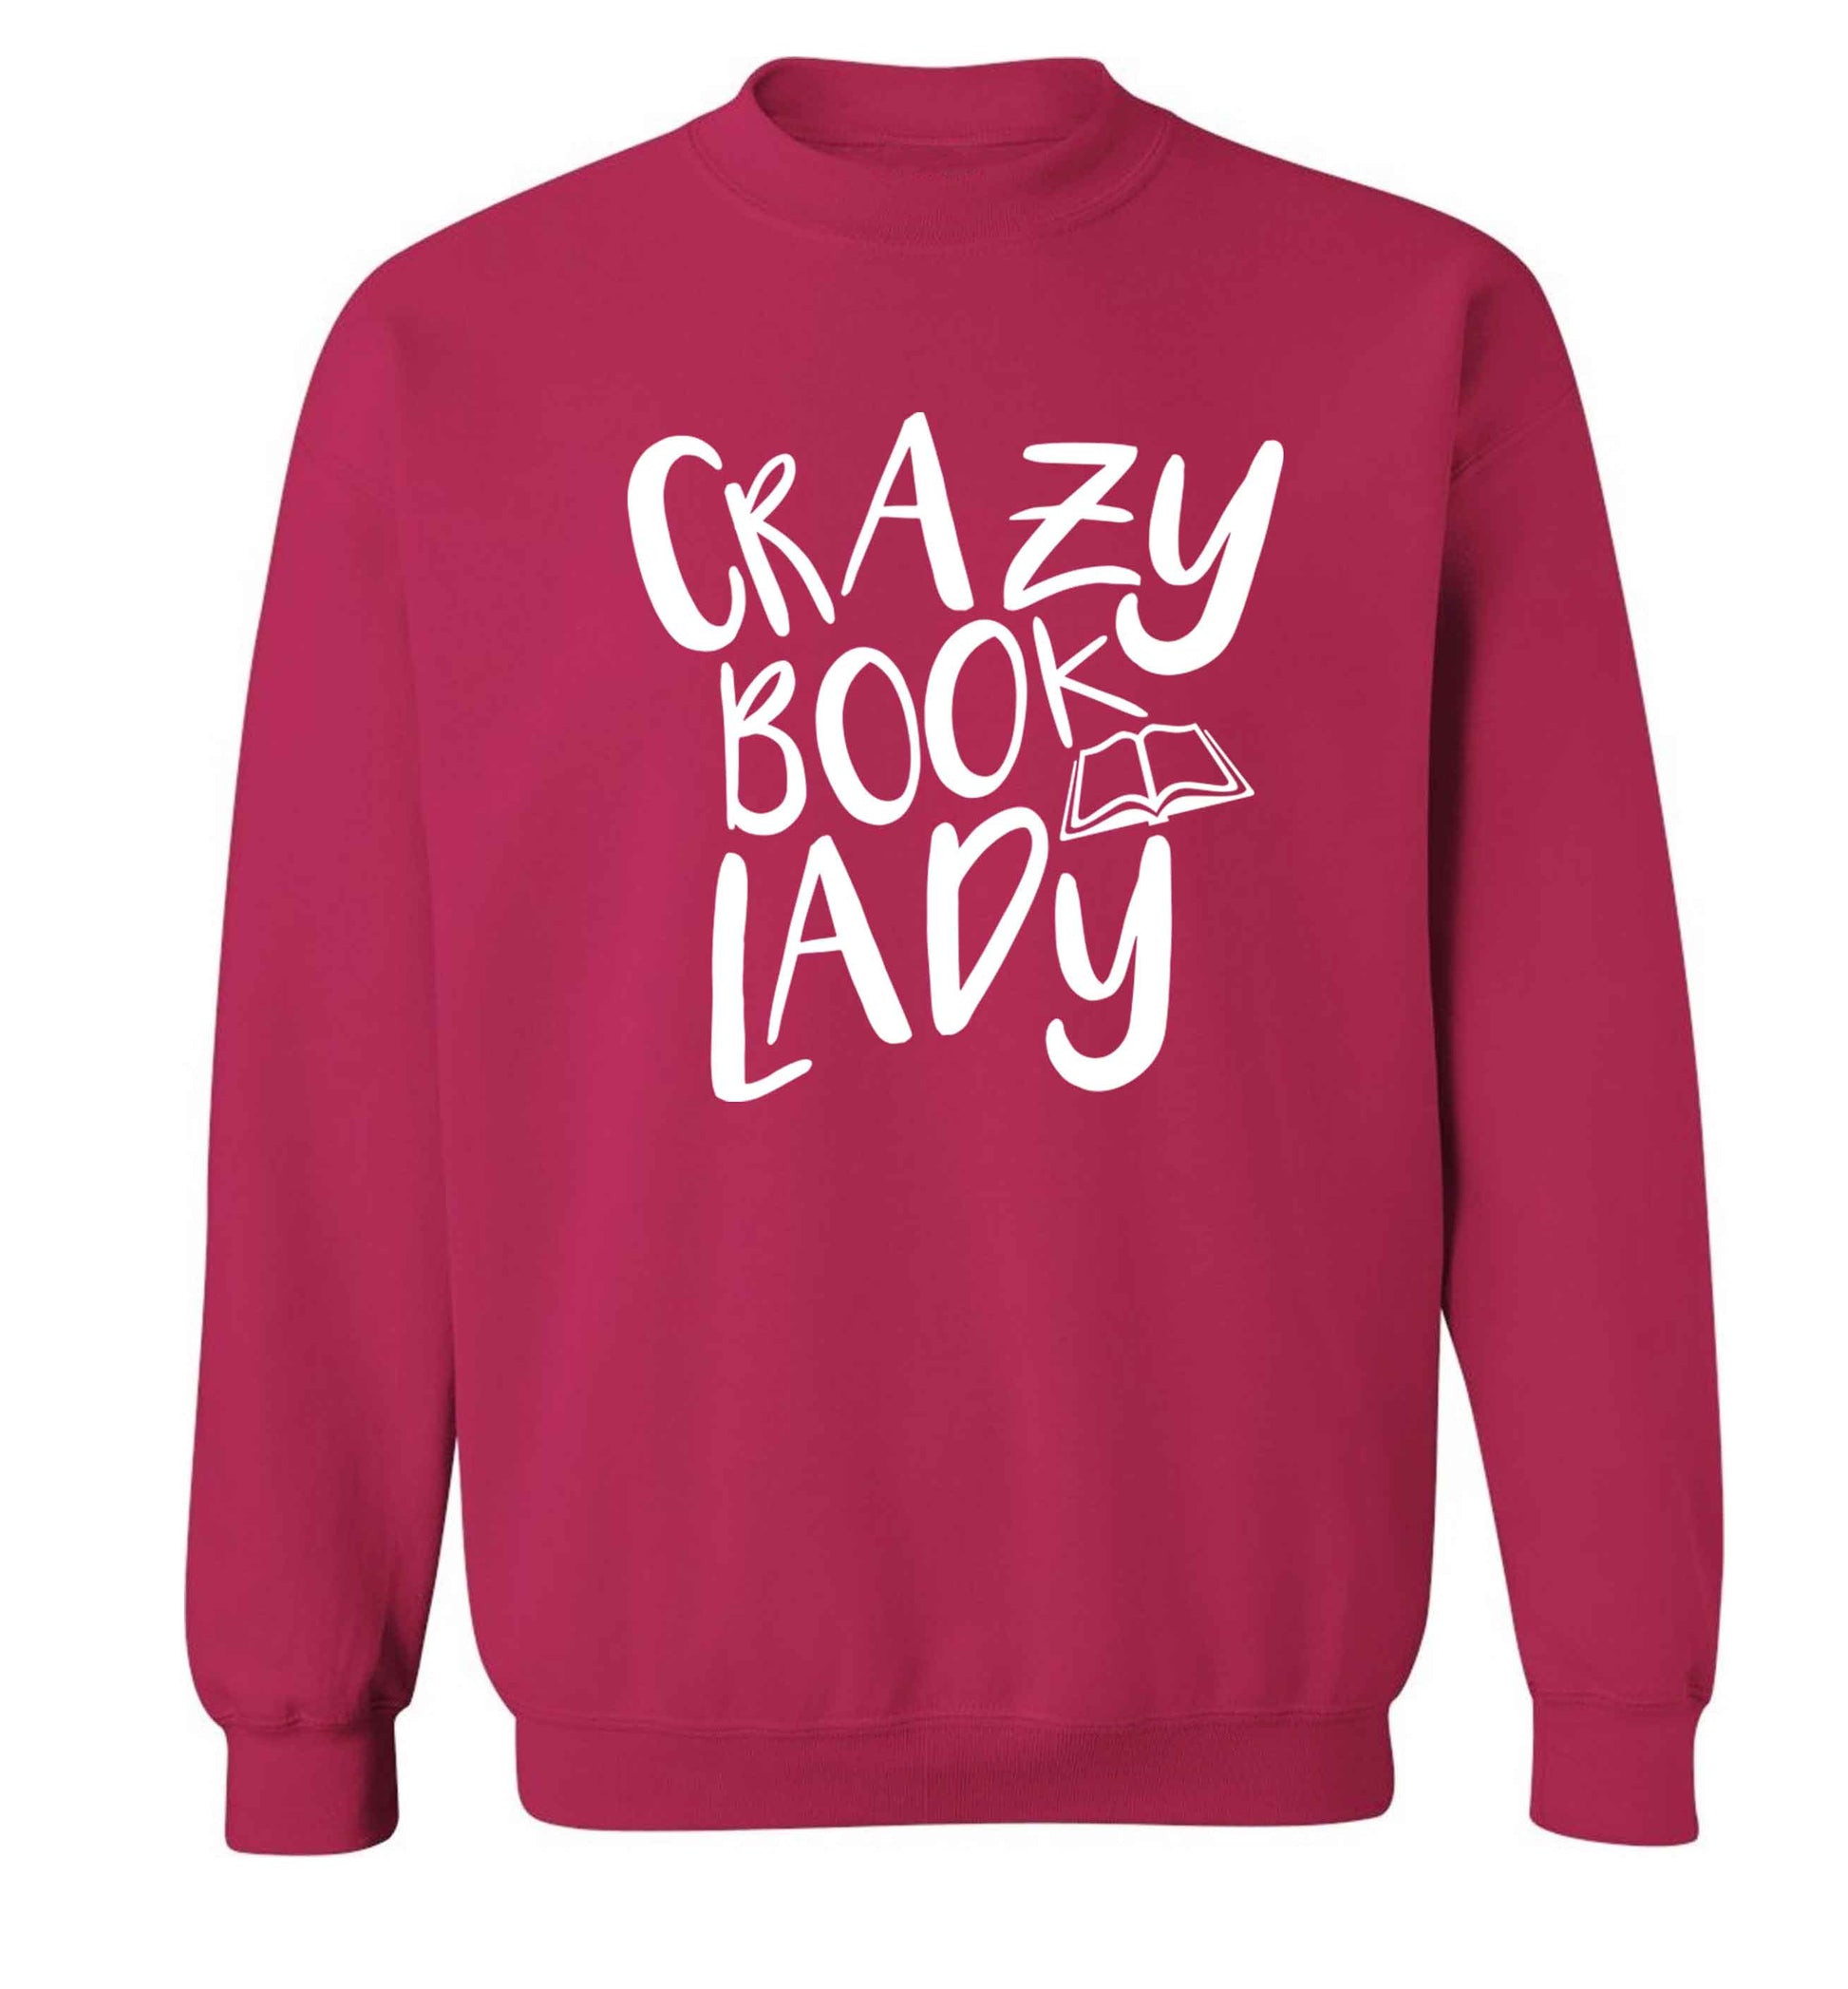 Crazy book lady Adult's unisex pink Sweater 2XL